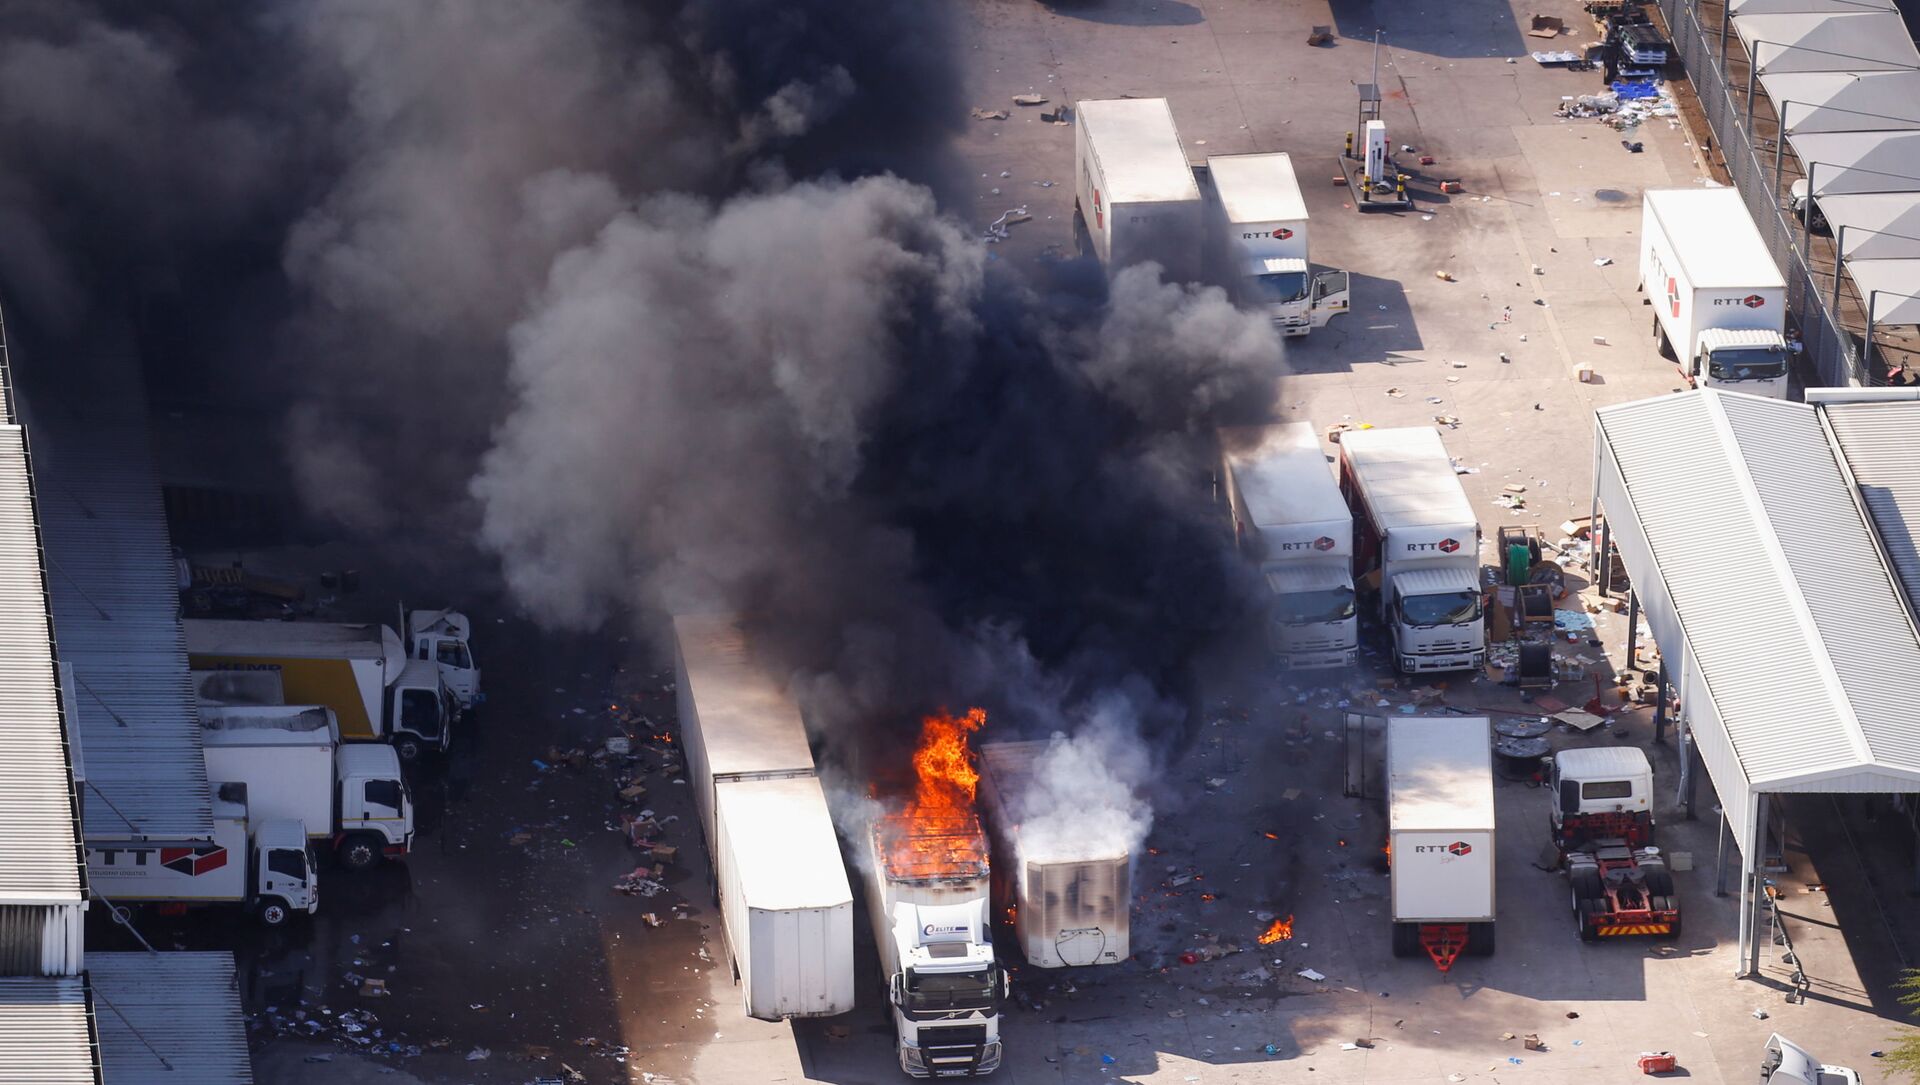 A general view of burning trucks after violence erupted following the jailing of former South African President Jacob Zuma, in Durban, South Africa, July 14, 2021 - Sputnik International, 1920, 29.07.2021